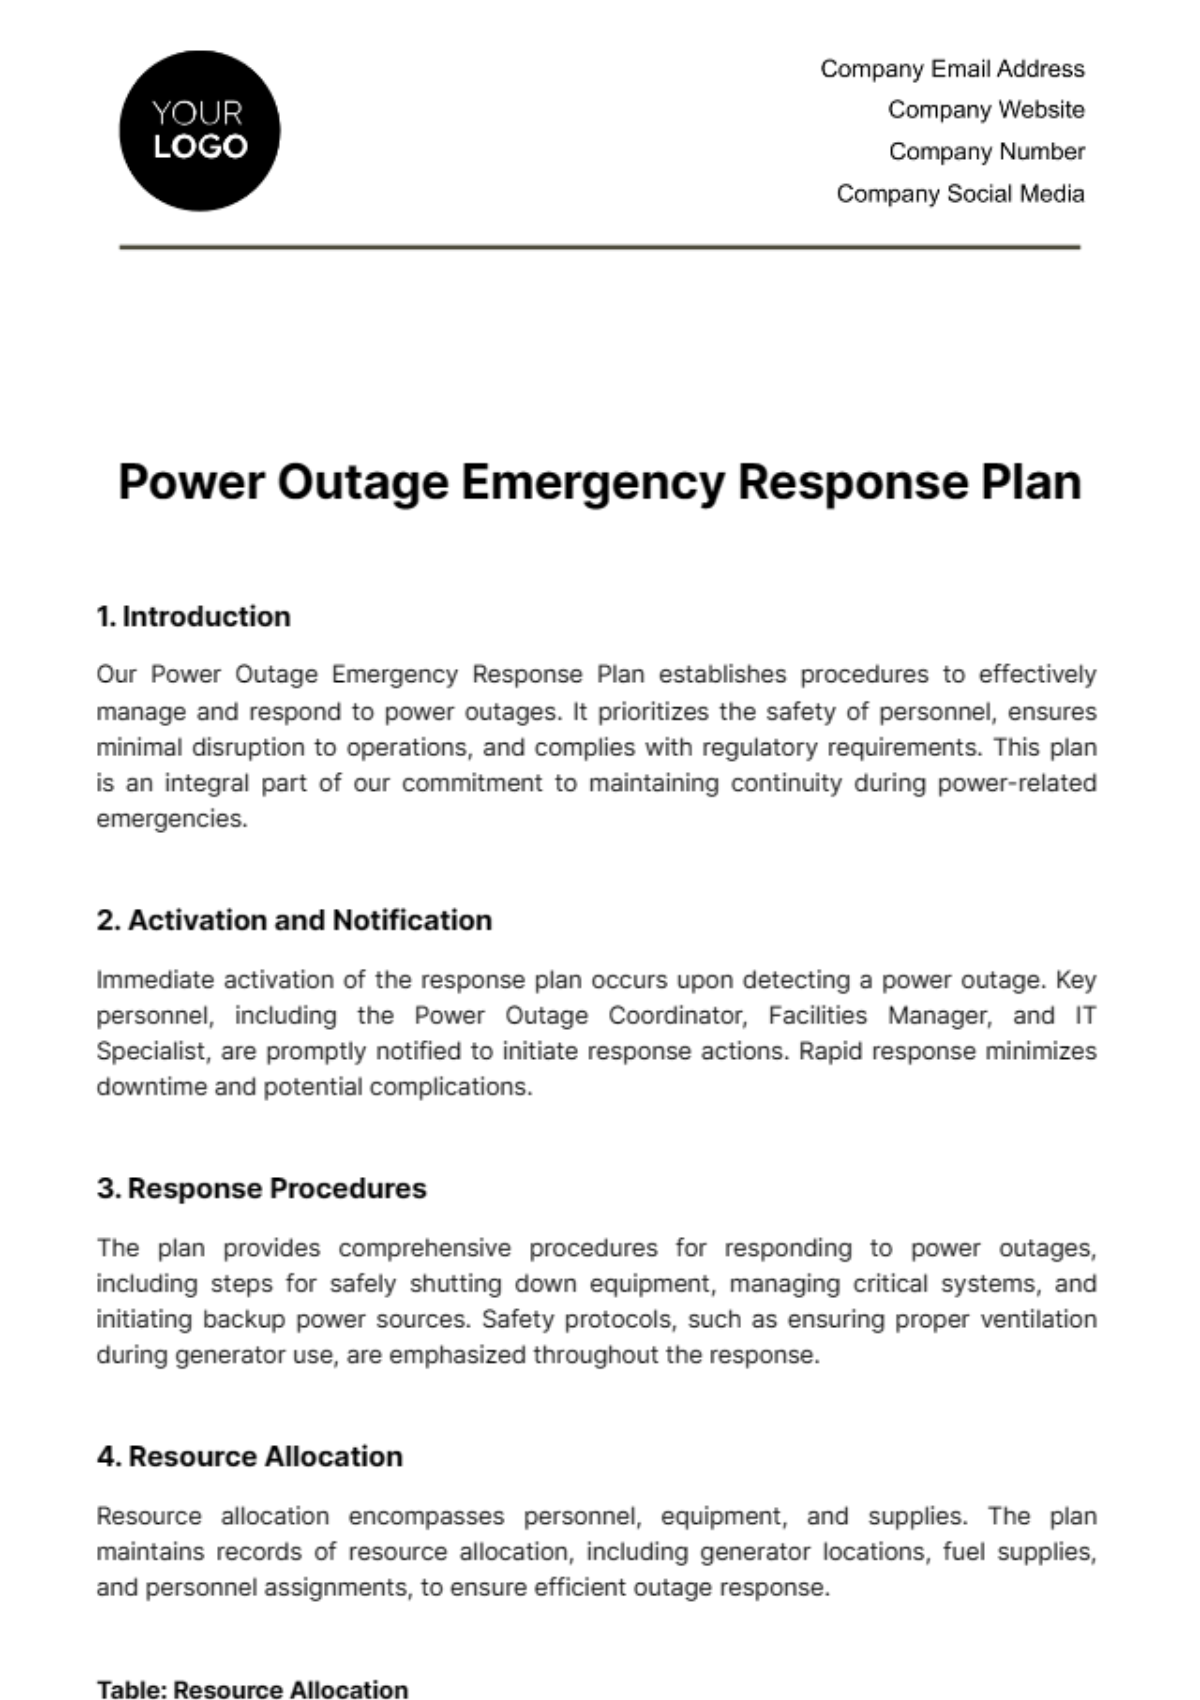 Power Outage Emergency Response Plan Template